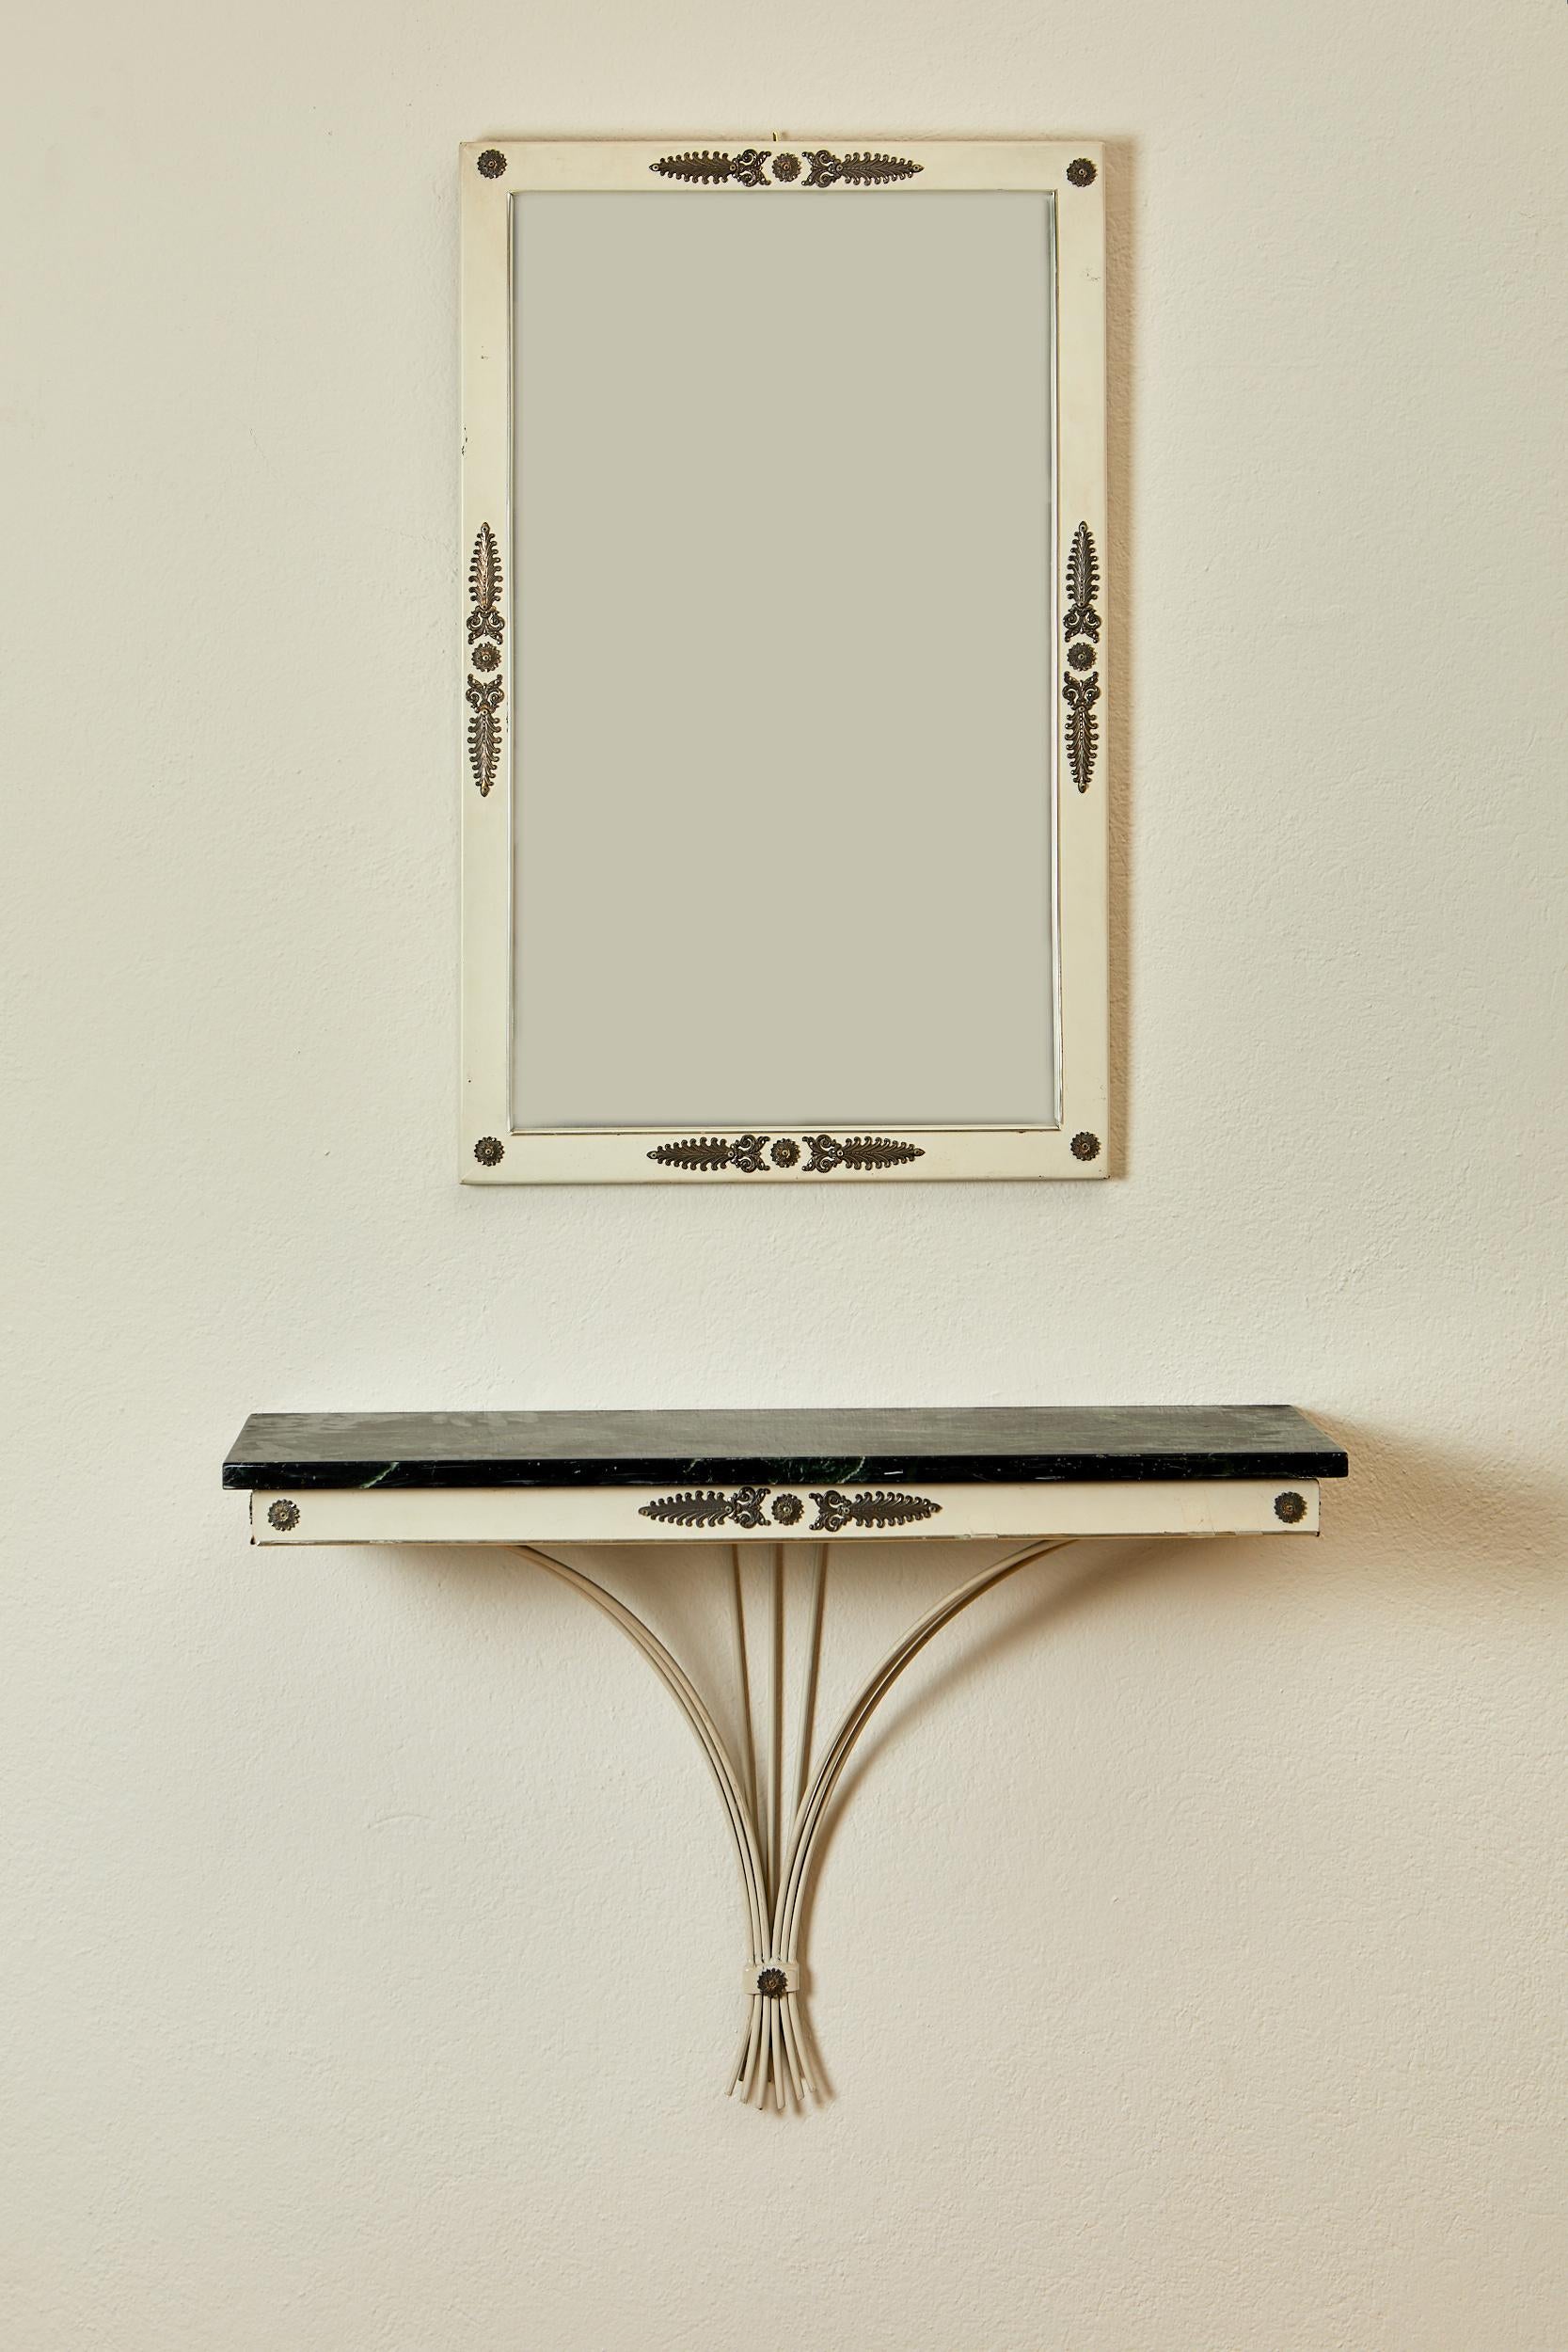 Wall mirror and console set,
lacquered iron and gilded brass,
marble top, sea green, gilt brass plates, circa 1950, France.
Mirror: height 80 cm, width 50 cm, depth 2 cm.
Console: height 31 cm, width 76 cm, depth 23 cm.



